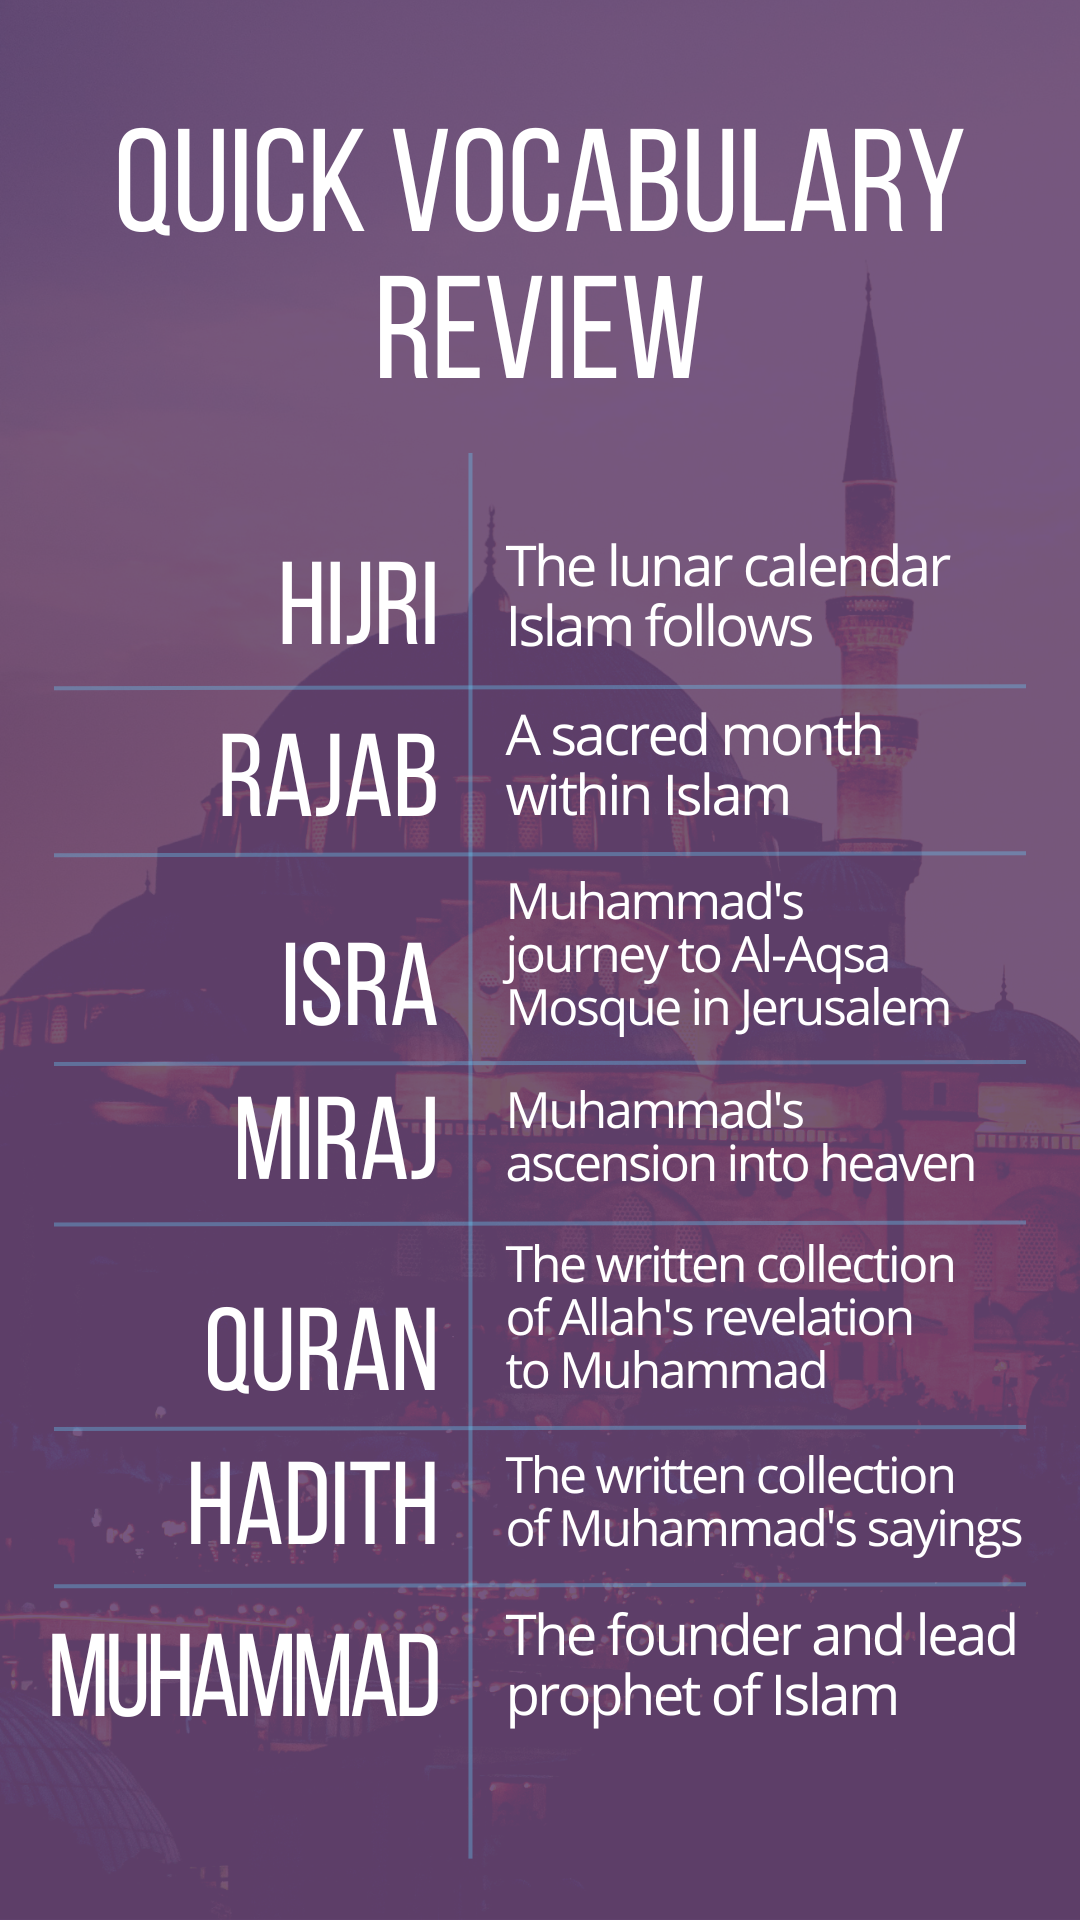 Islamic vocabulary words from this blog post